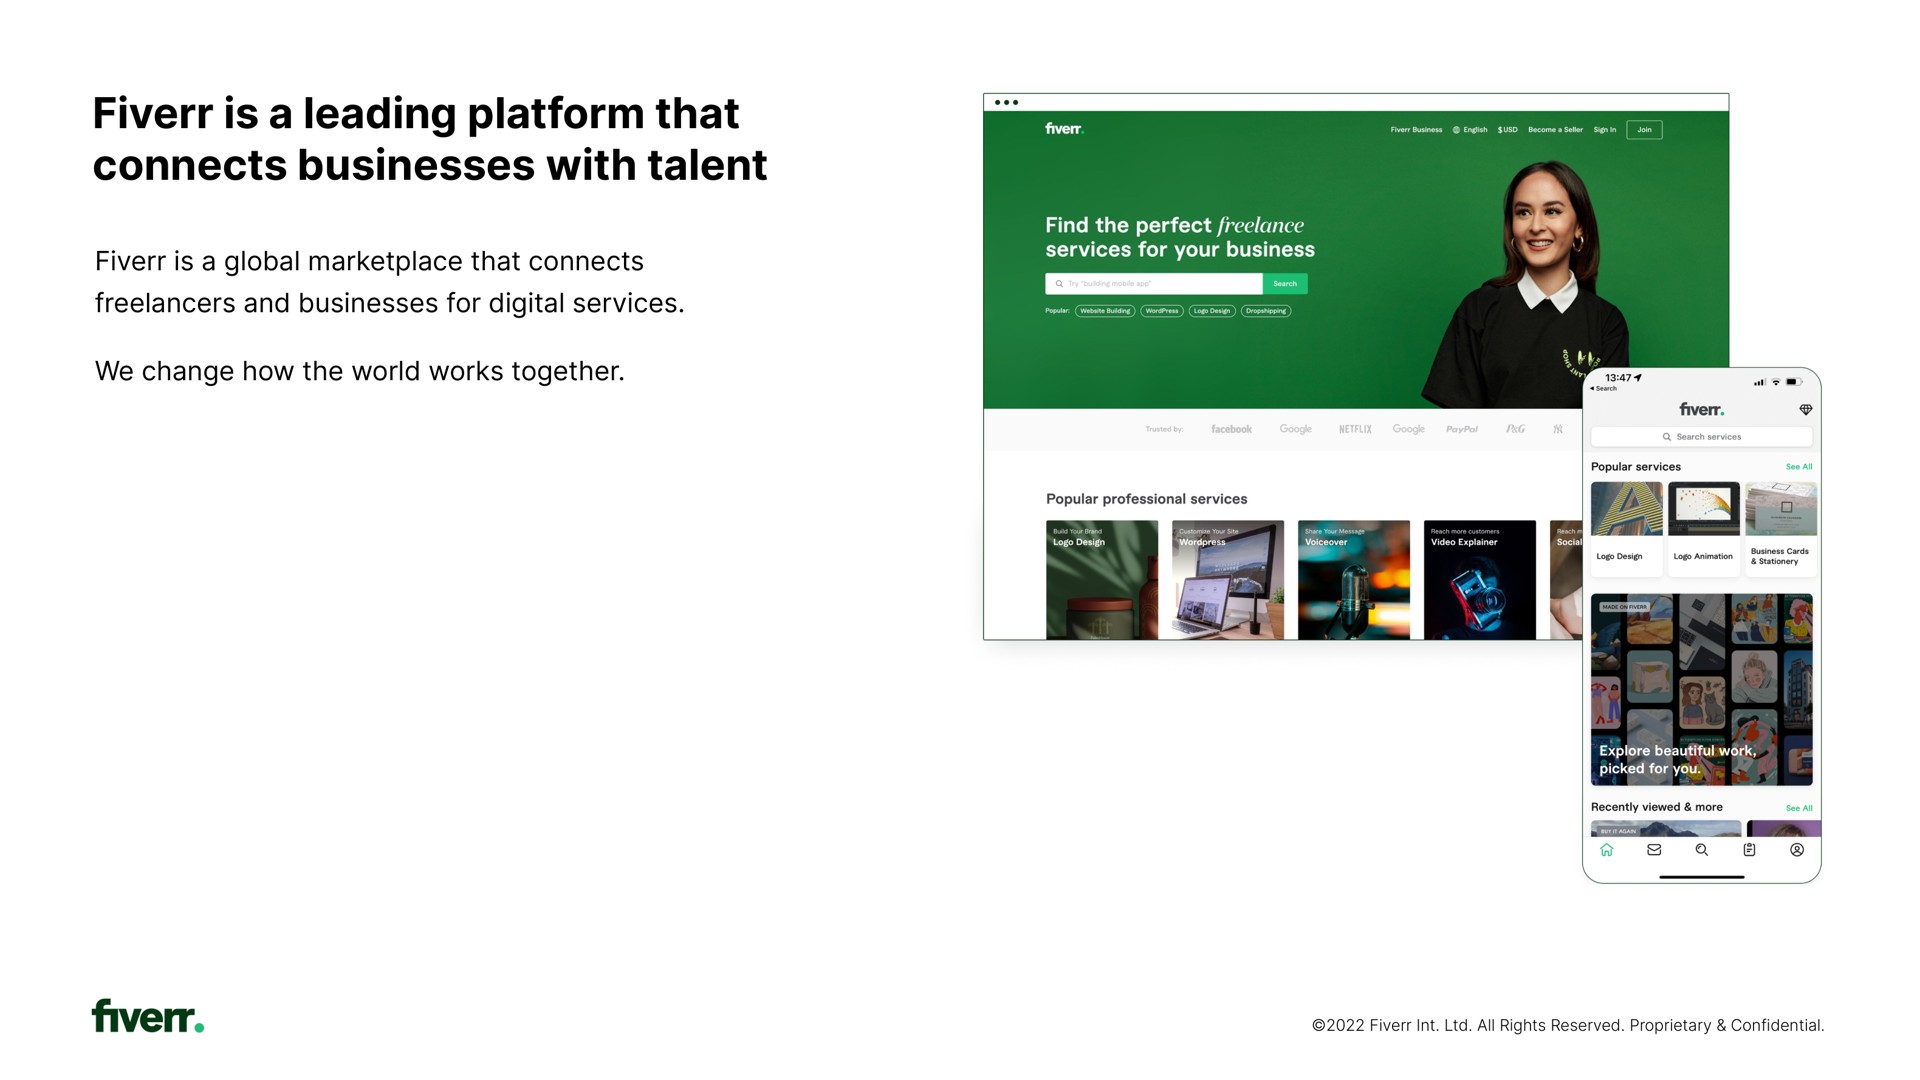 is a leading platform that connects businesses with talent | Fiverr